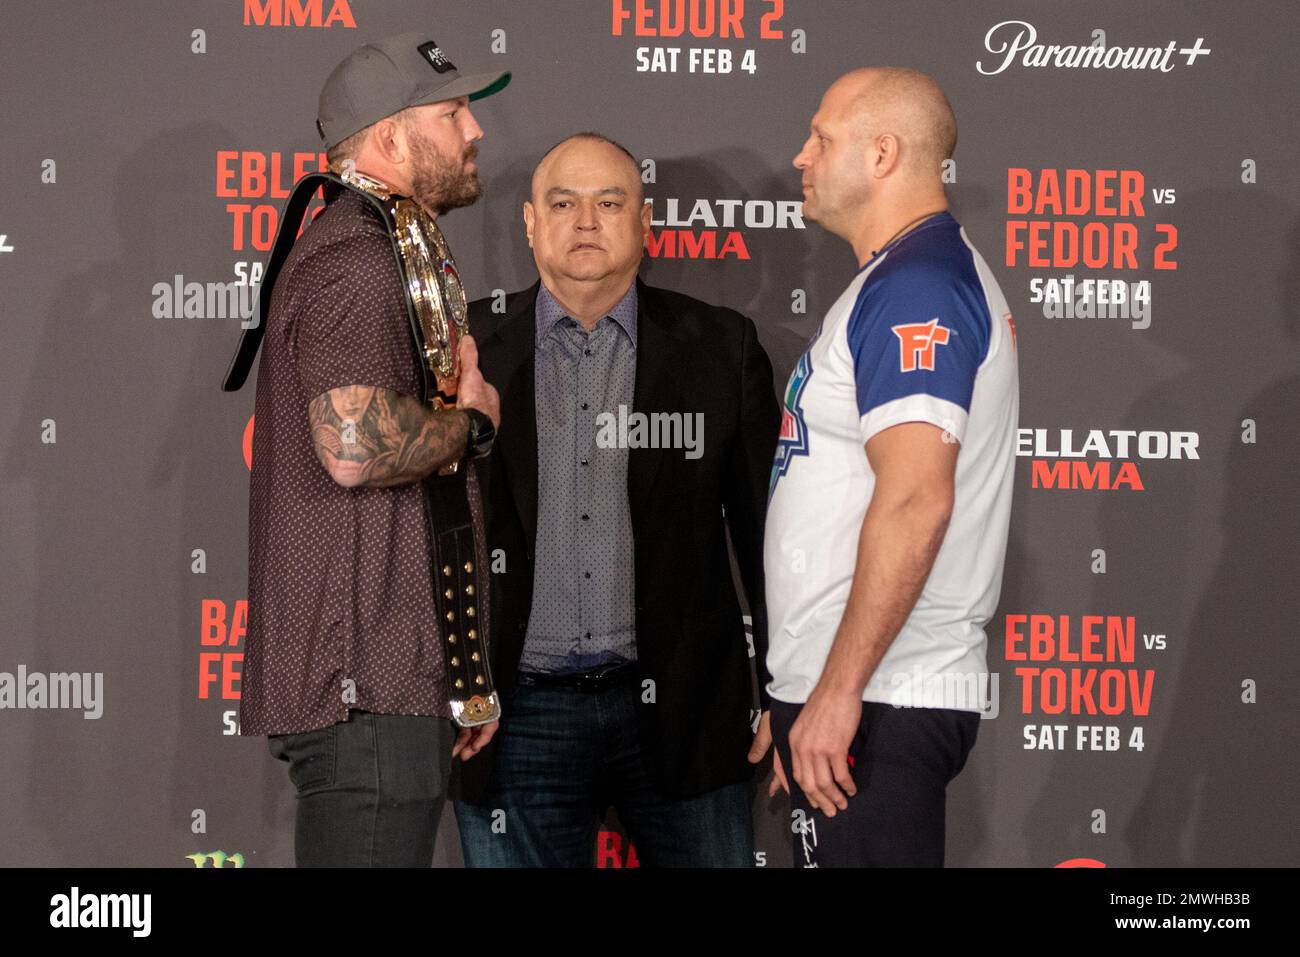 Los Angeles, California - February 1st: Ryan Bader and Fedor Emelianenko, Face Off ahead of their Bellator Middleweight Championship fight at Bellator 290 Bader vs Fedor 2 at The Forum on February 4th, 2023 in Los Angeles, California, United States. (Photo by Matt Davies) Stock Photo